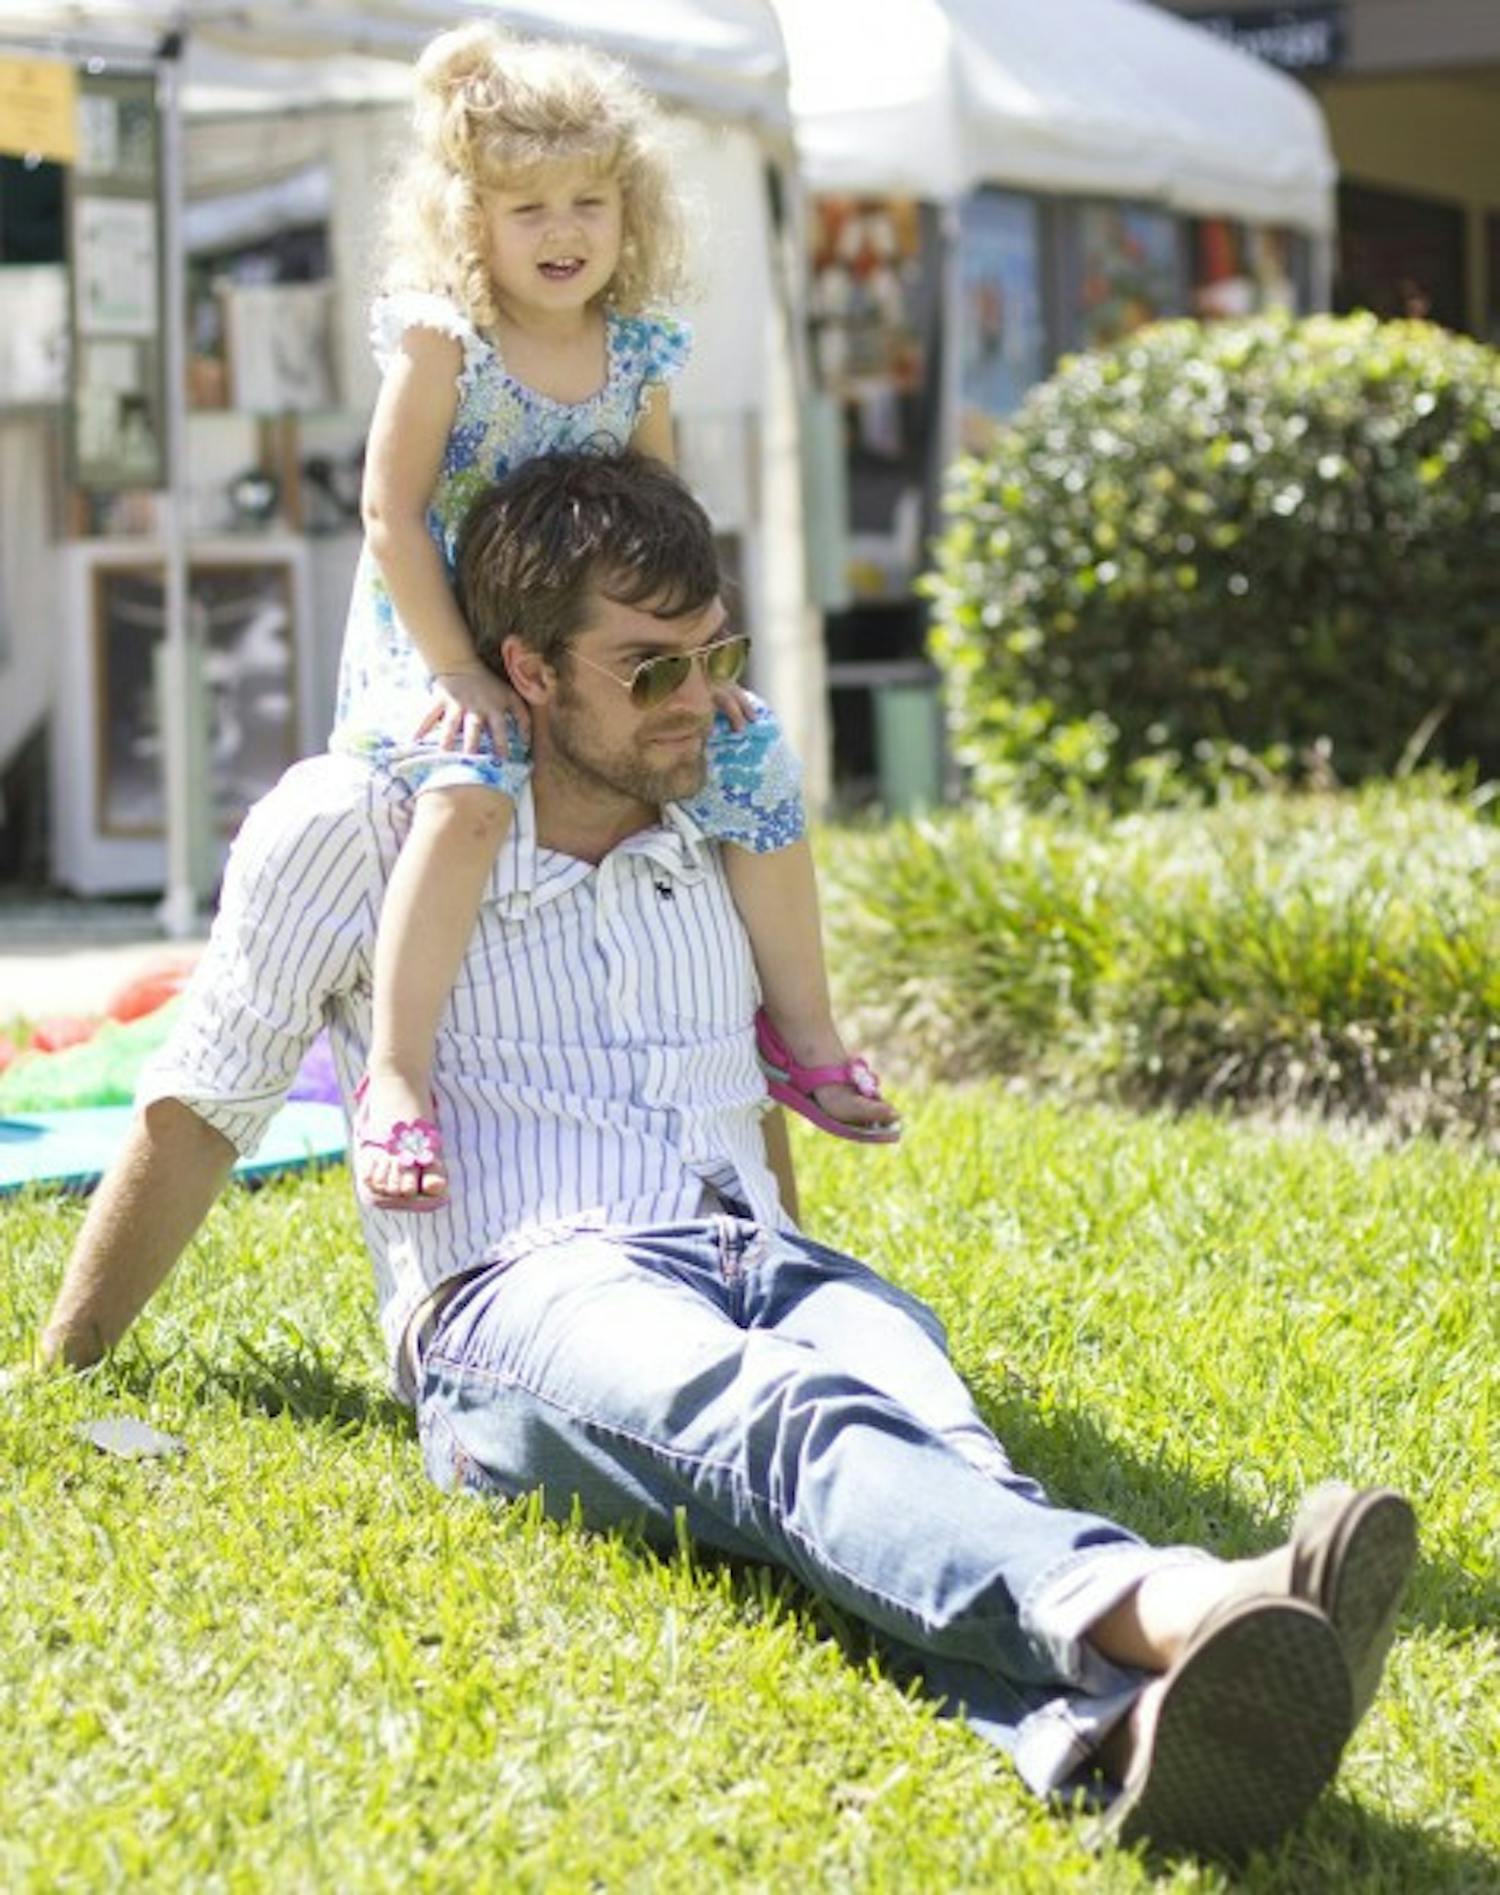 Robert Privette, 35, and his daughter Elizabeth, 2, relax in the sun together at the Gainesville Fine Arts Association's 28th annual GFAA Art Festival at Thornebrook over the weekend at 2441 NW 43rd Street.